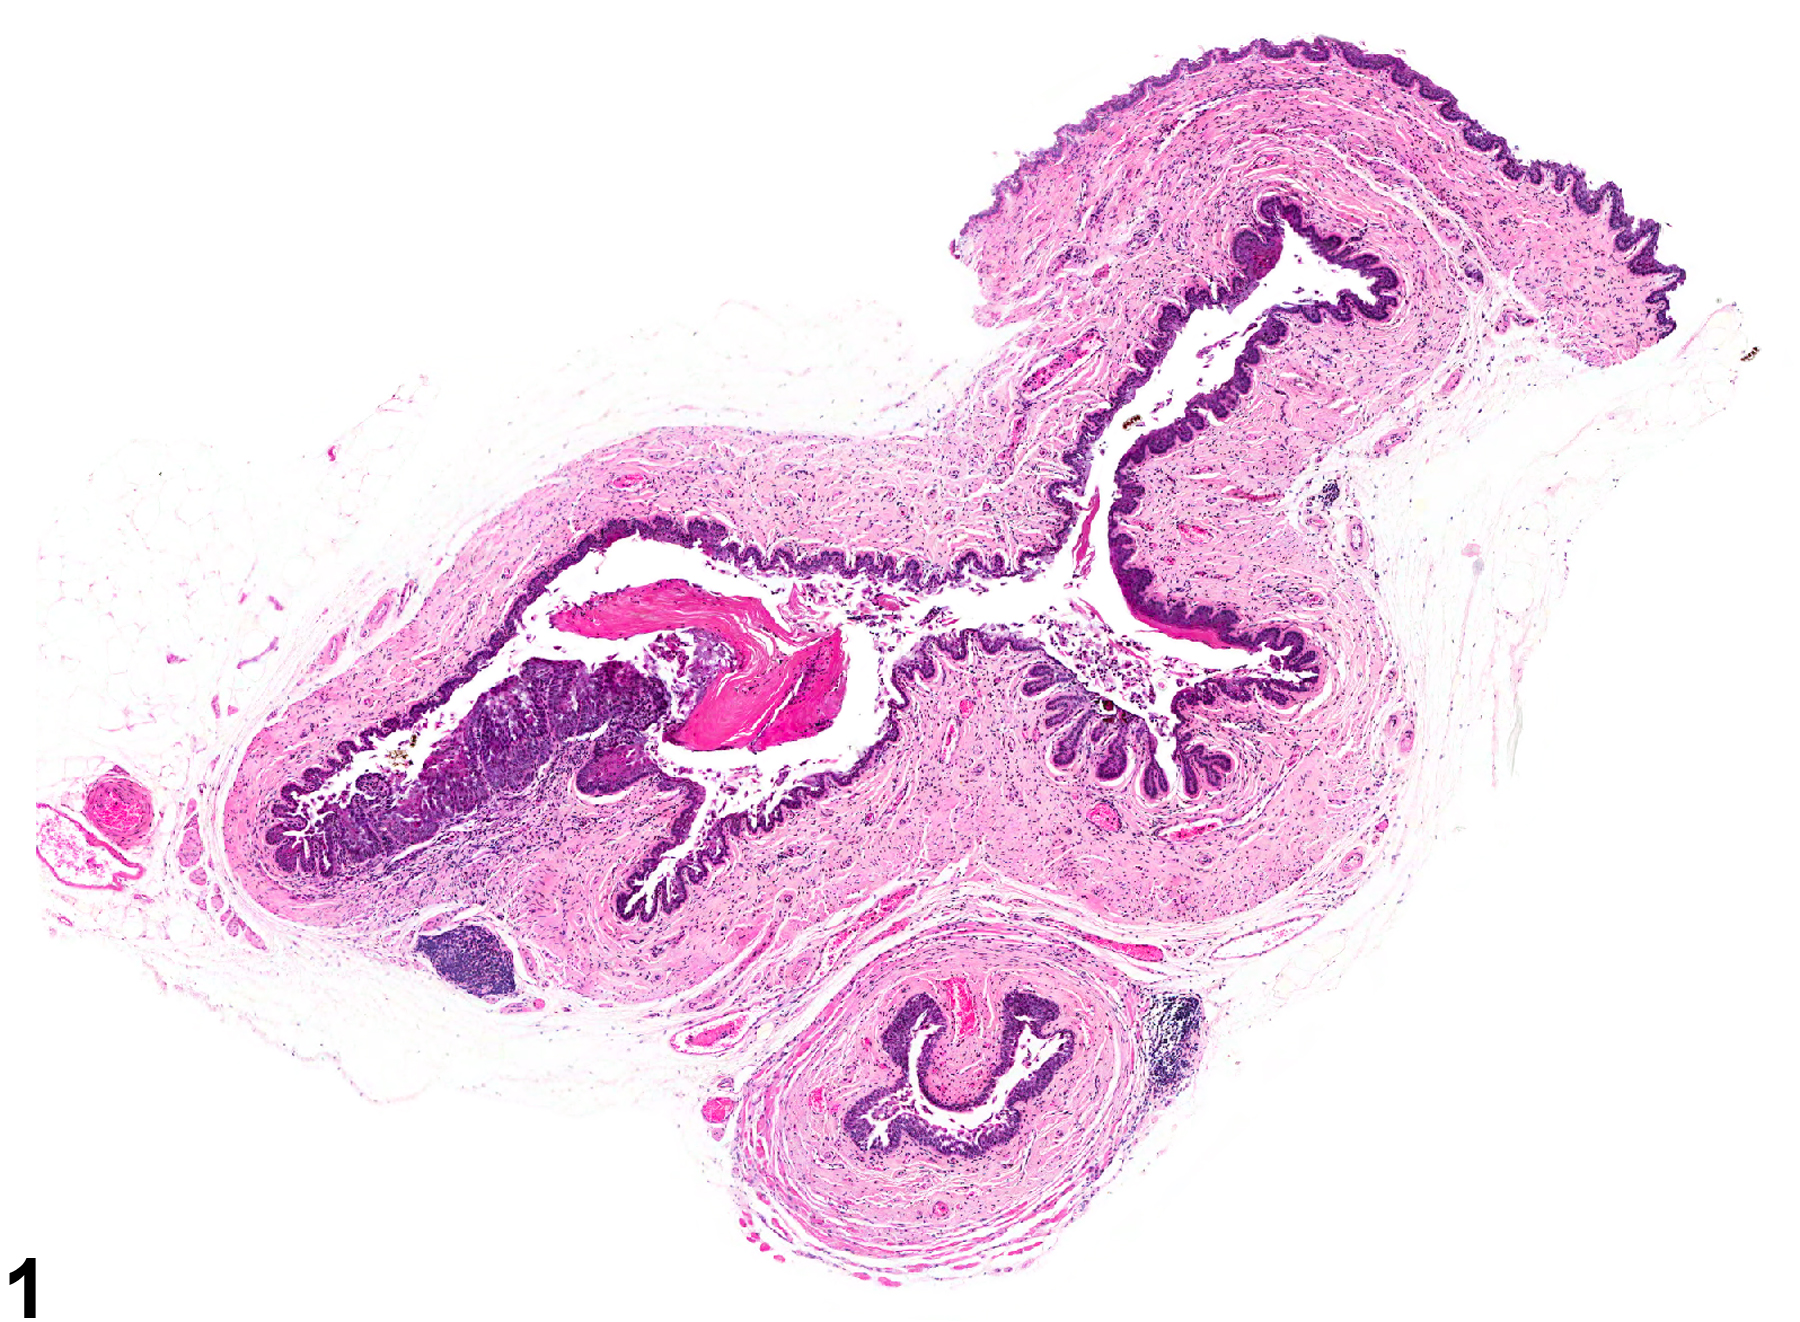 Image of hyperplasia in the vagina from a female B6C3F1 mouse in a chronic study